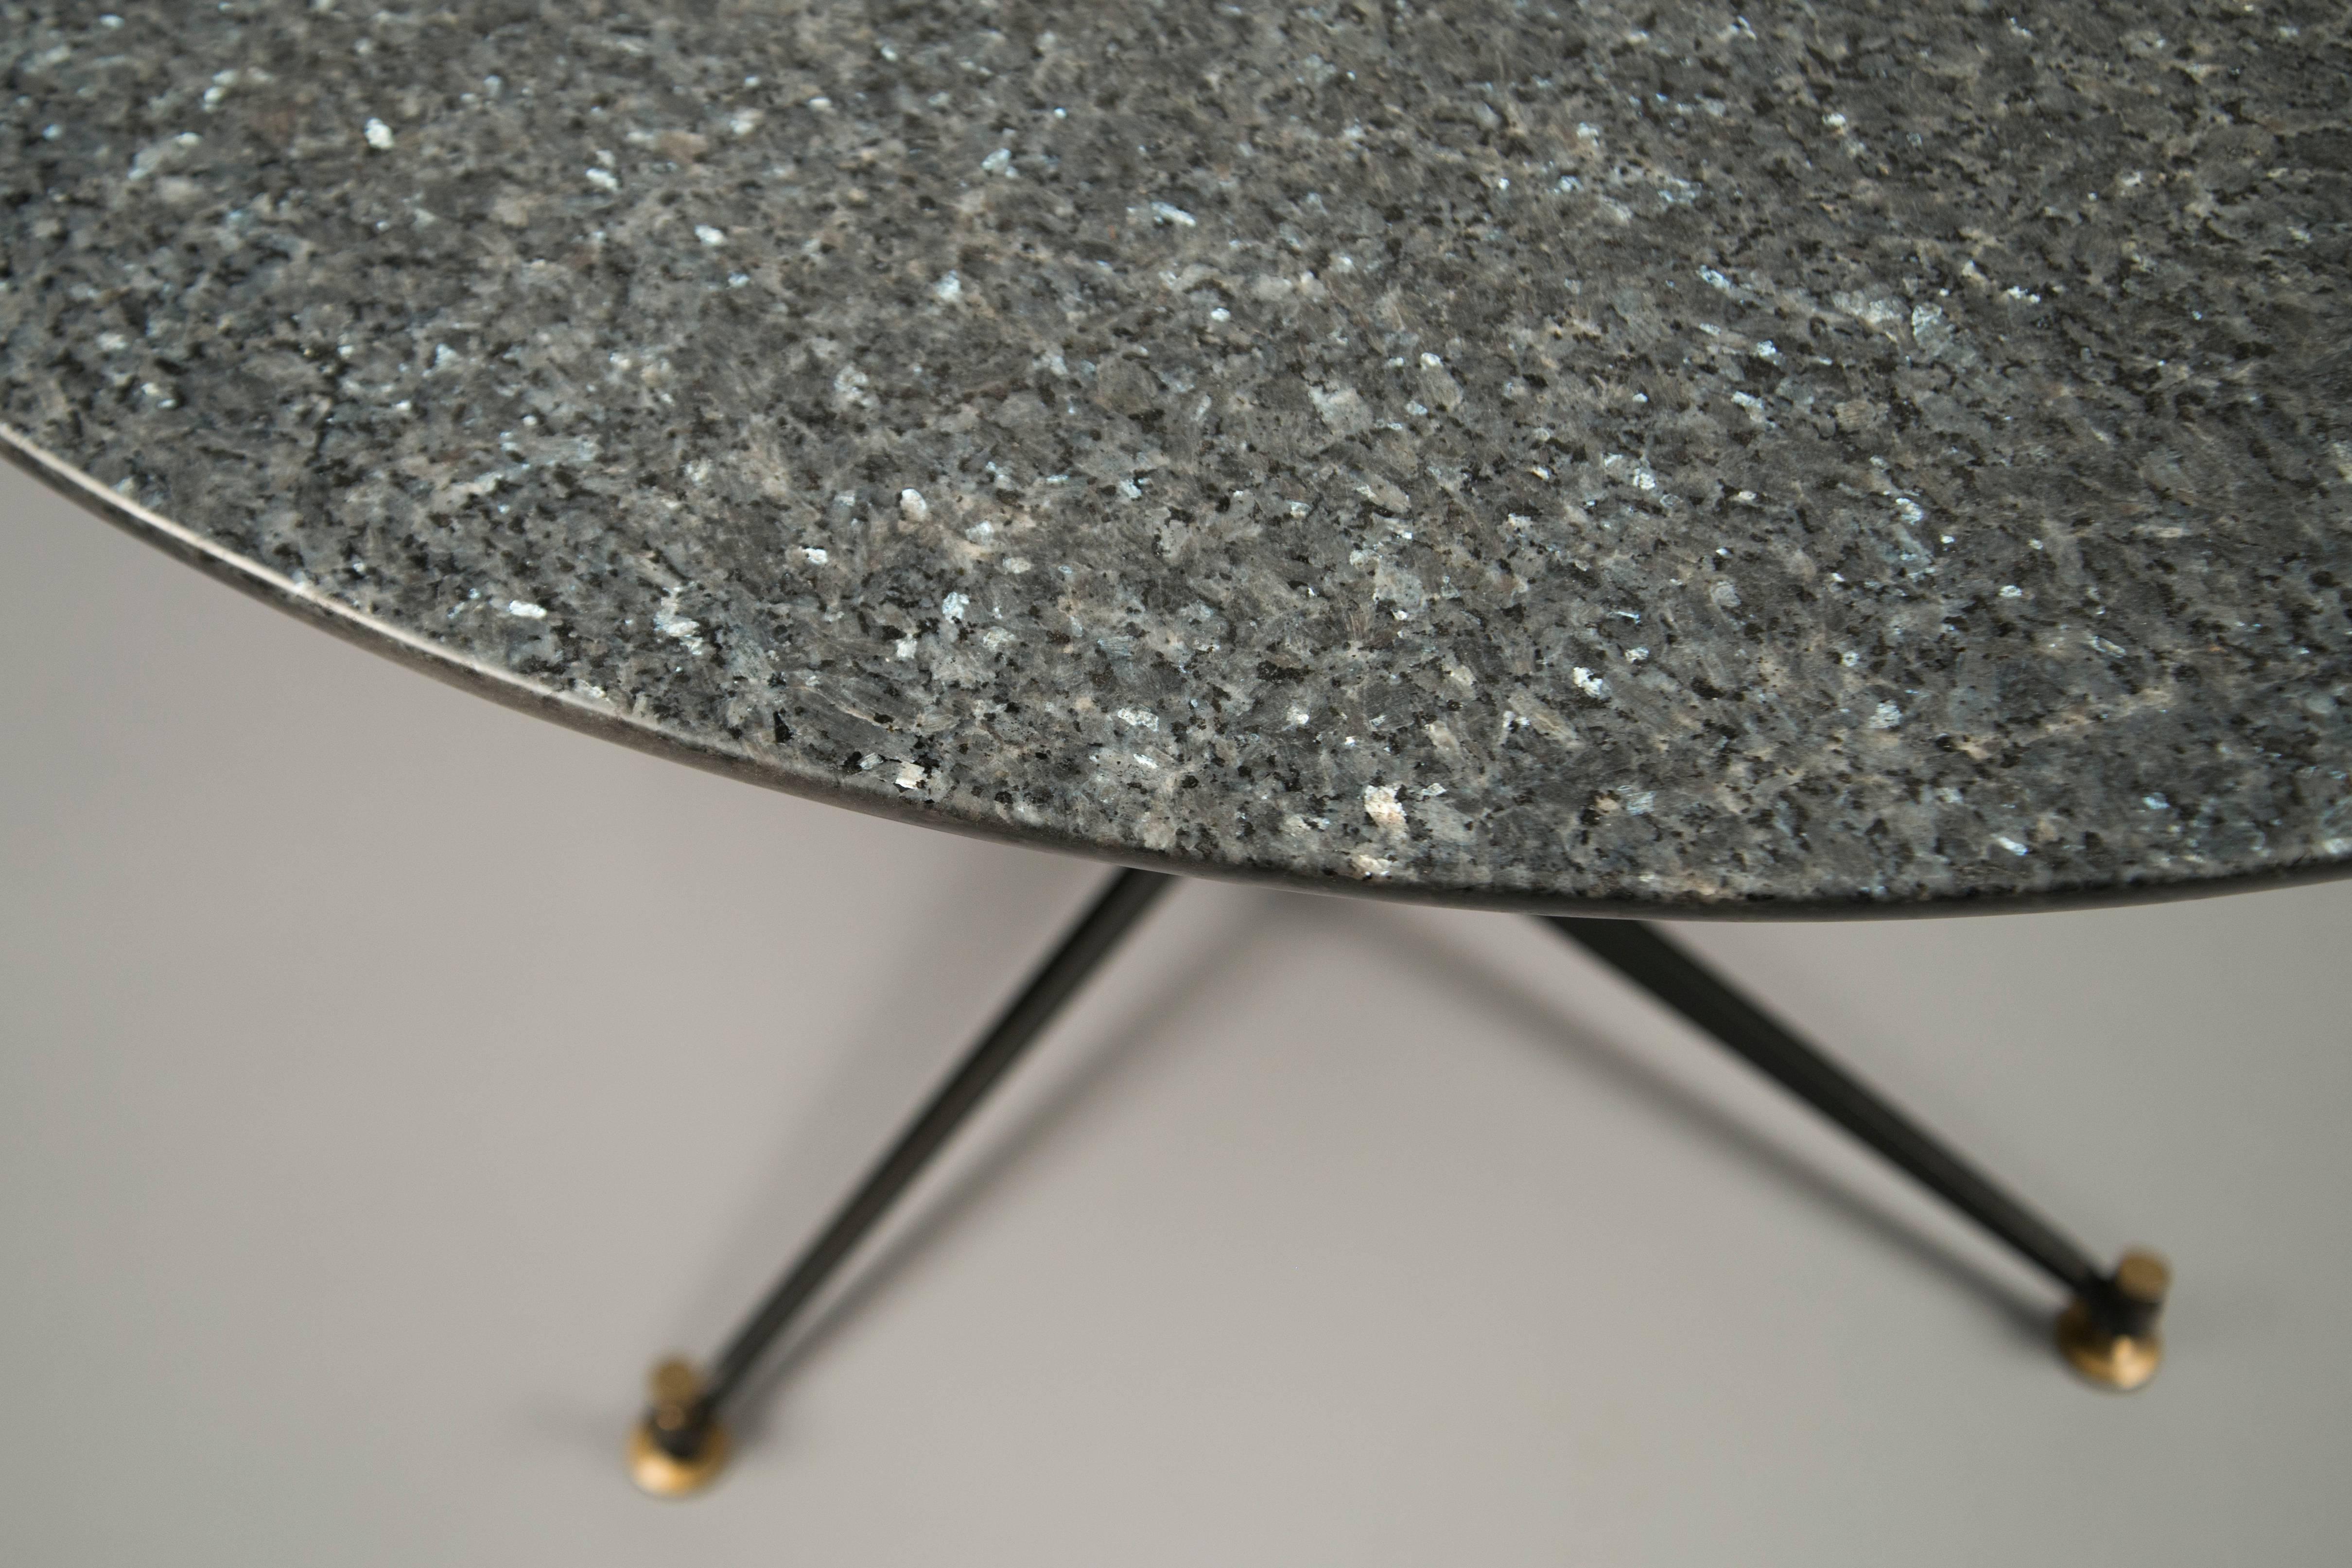 Circular centre table composed of a black metal base with bronze screws and sabots, supporting a gray granite top.
Our number N-10244.